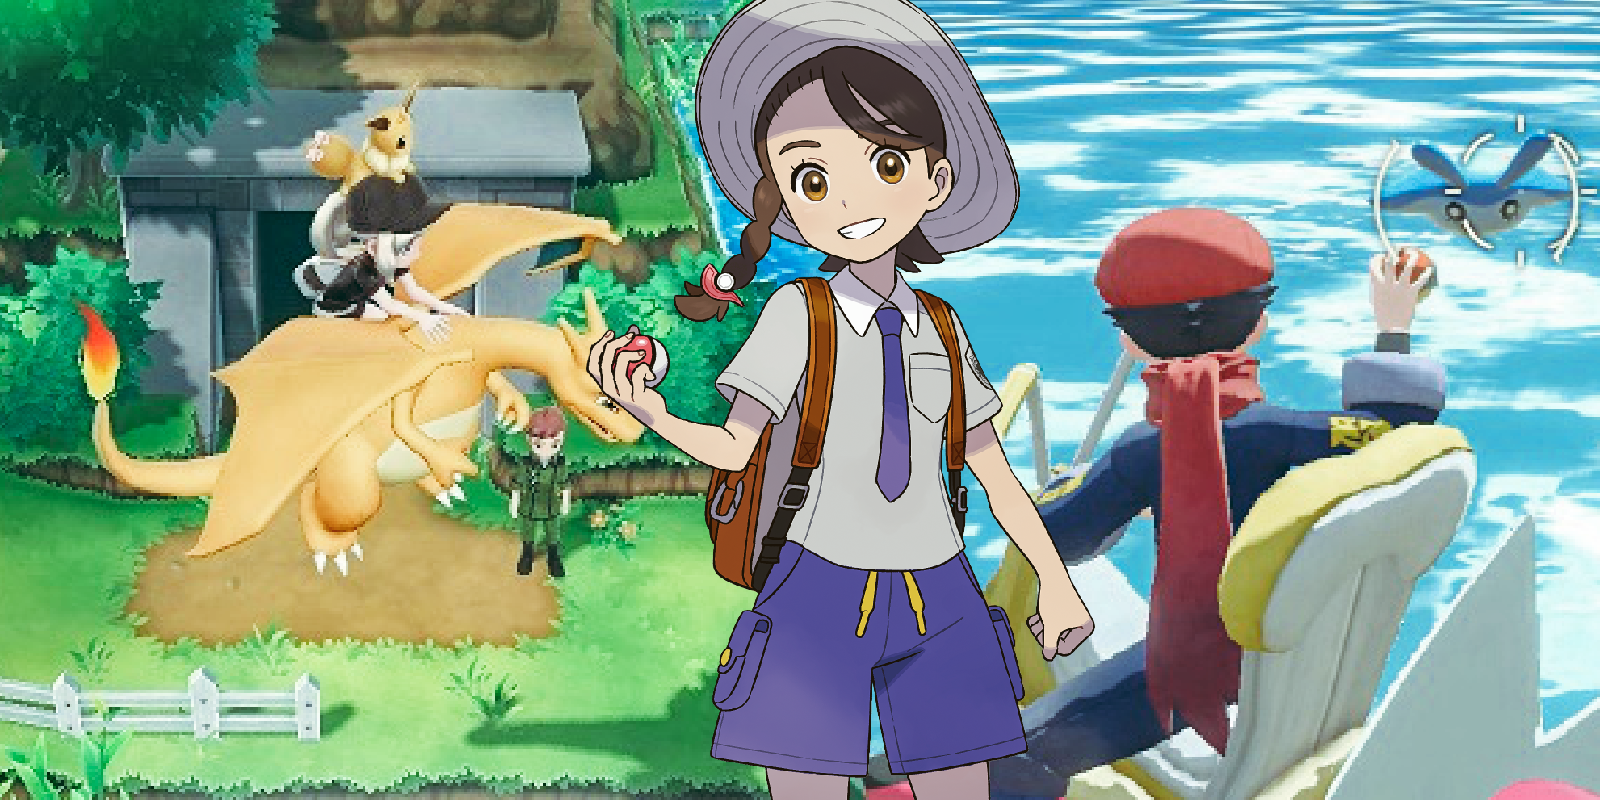 Pokemon Scarlet and Violet will feature an open-world storyline, new Pokemon,  and a Let's Go mechanic